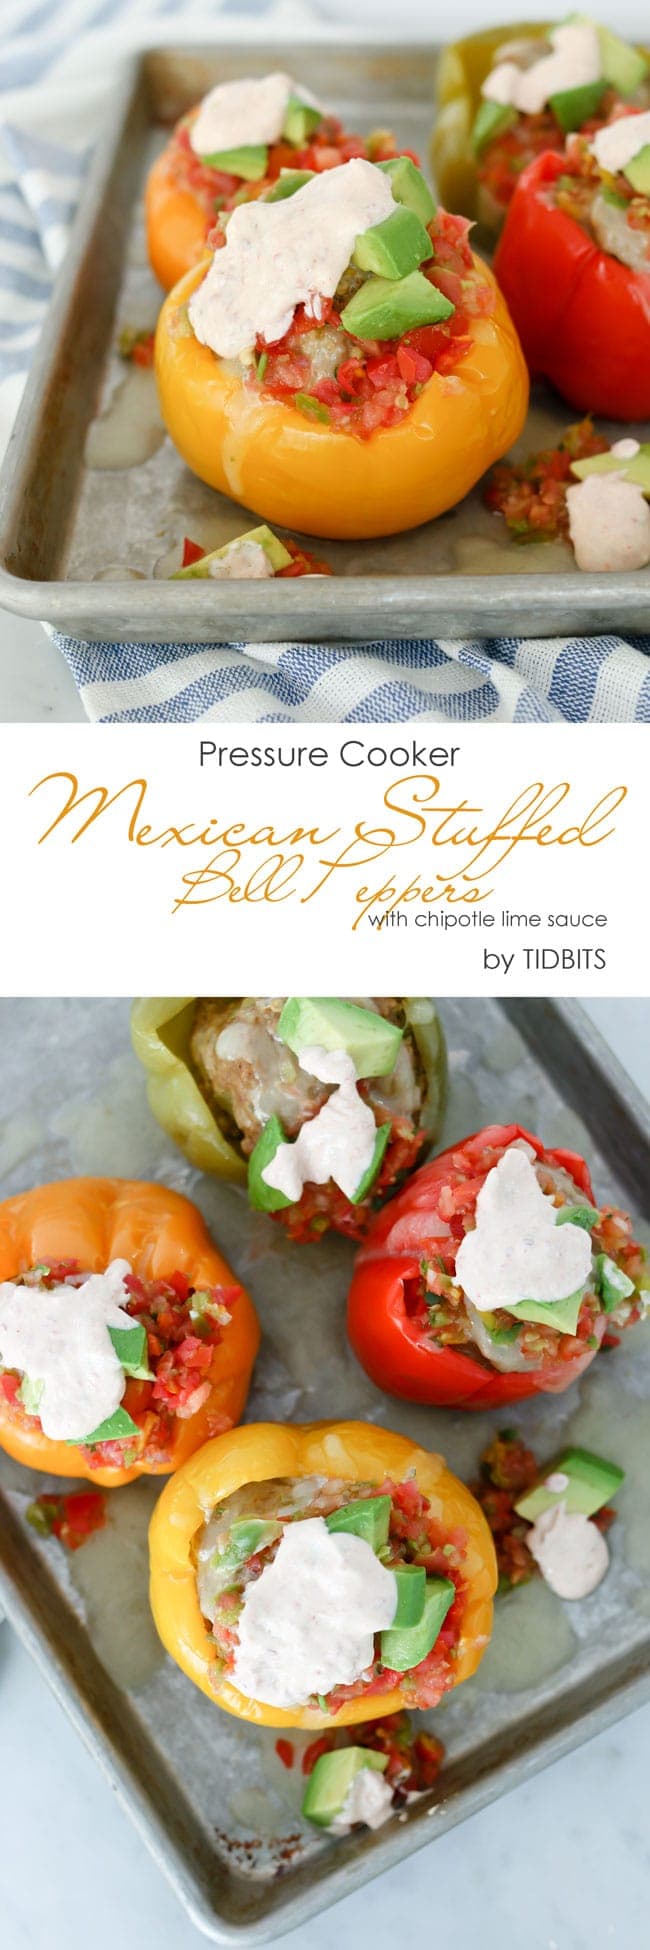 Pressure Cooker Mexican Stuffed Bell Pepper with chipotle lime sauce.